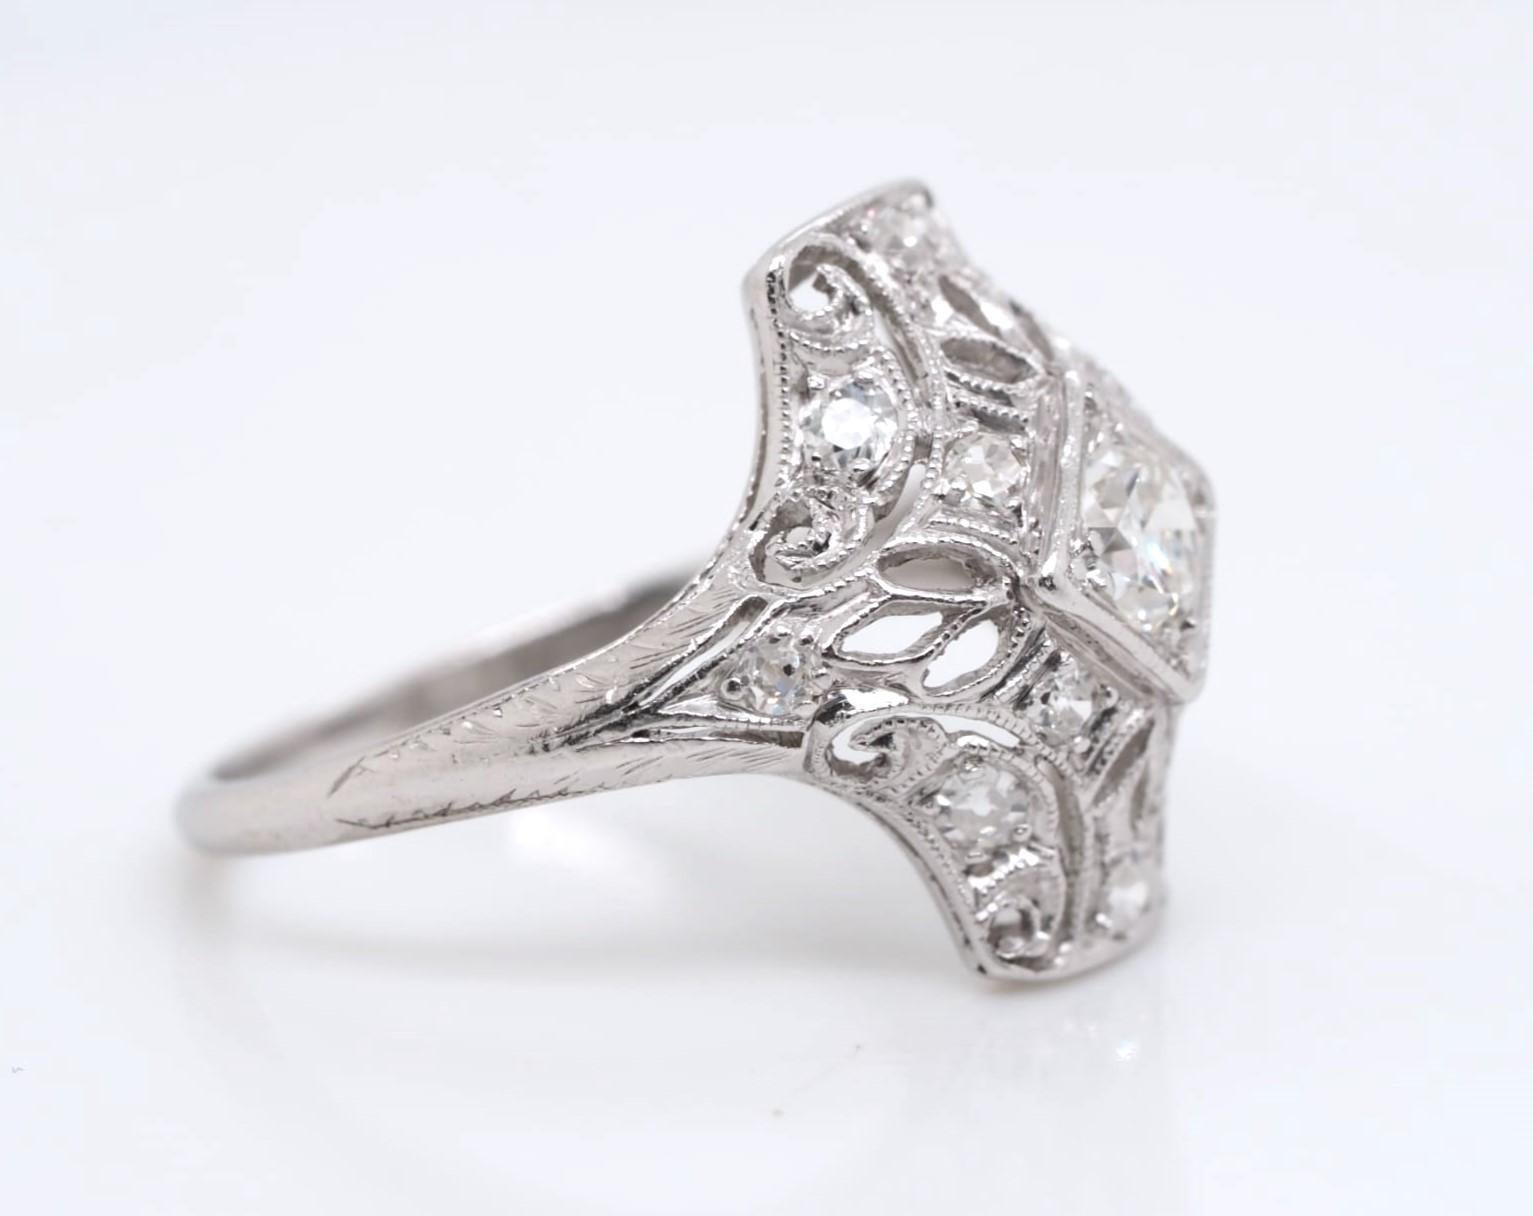 This vintage and antique engagement ring is made of genuine platinum and features a stunning 0.5 ct old European cut diamond. The ring is size 4.5 and can be resized if needed. The diamond has a very slight inclusion (VS2) and has a color grade of